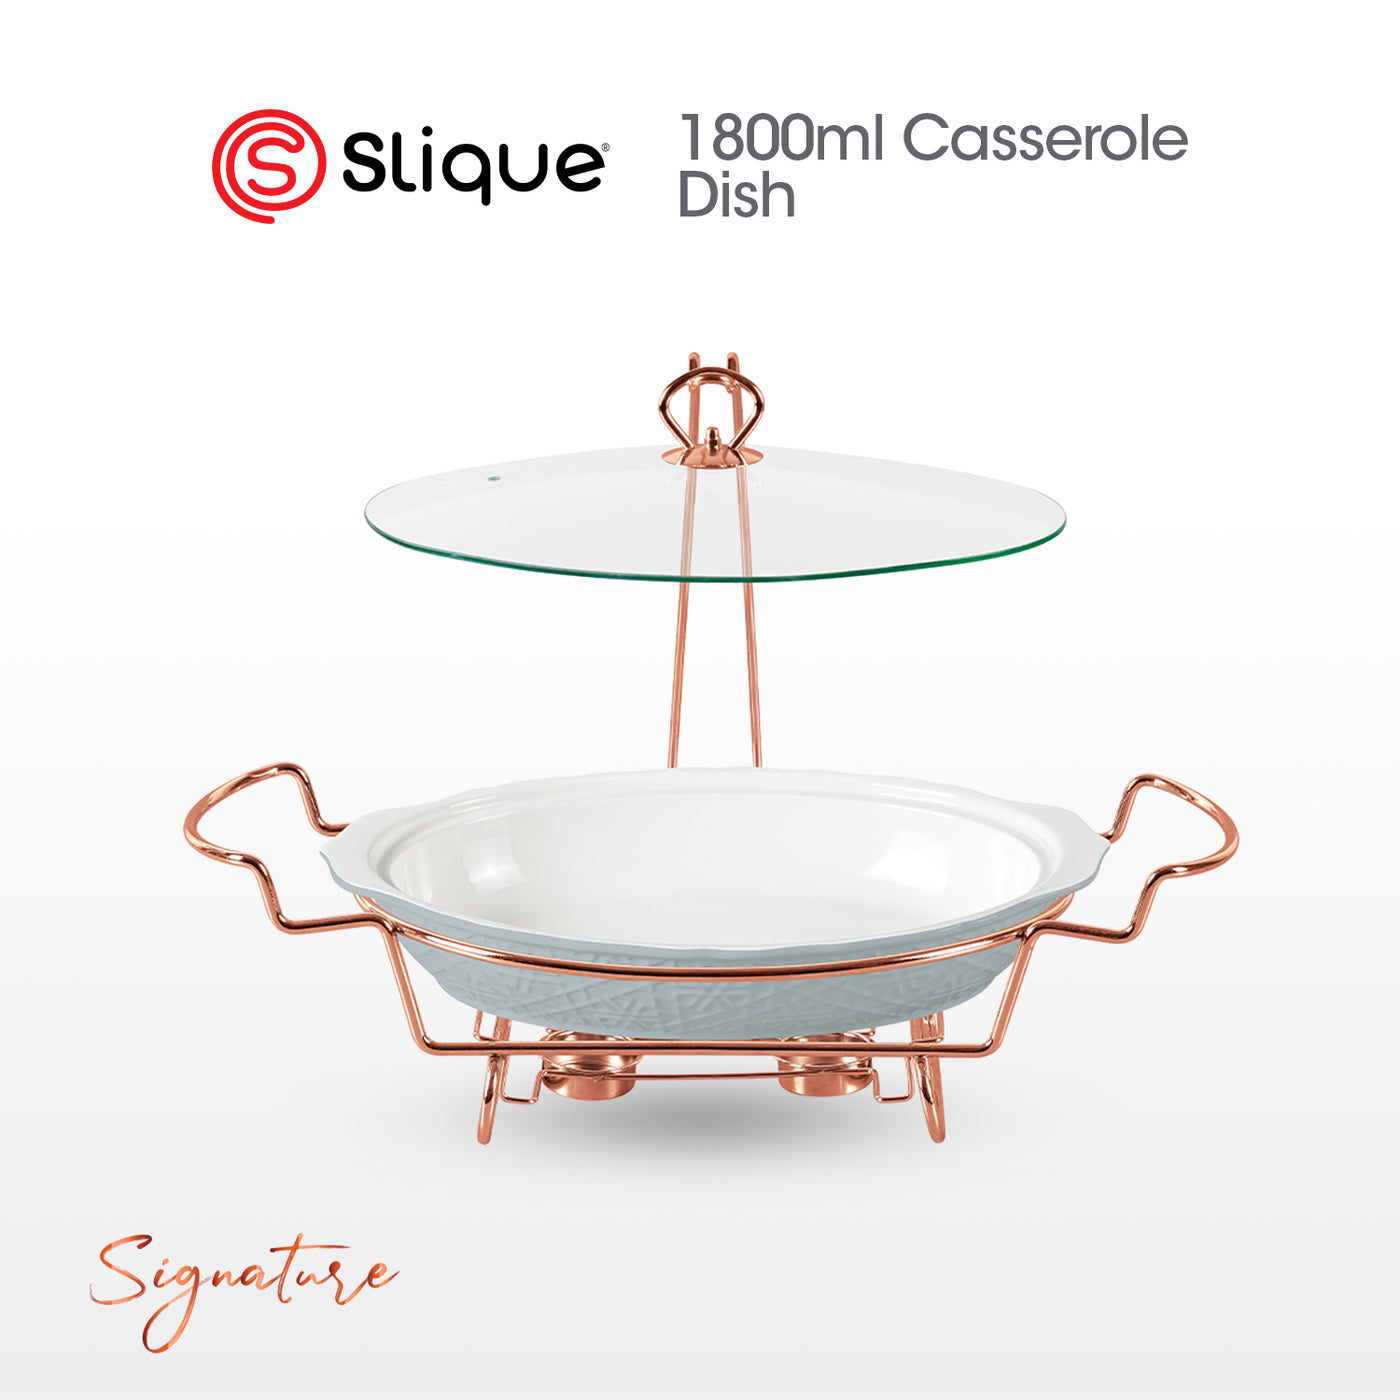 SLIQUE Casserole Serving Dish Oval, Signature Porcelain Collection Copper Stand with Candle Burner